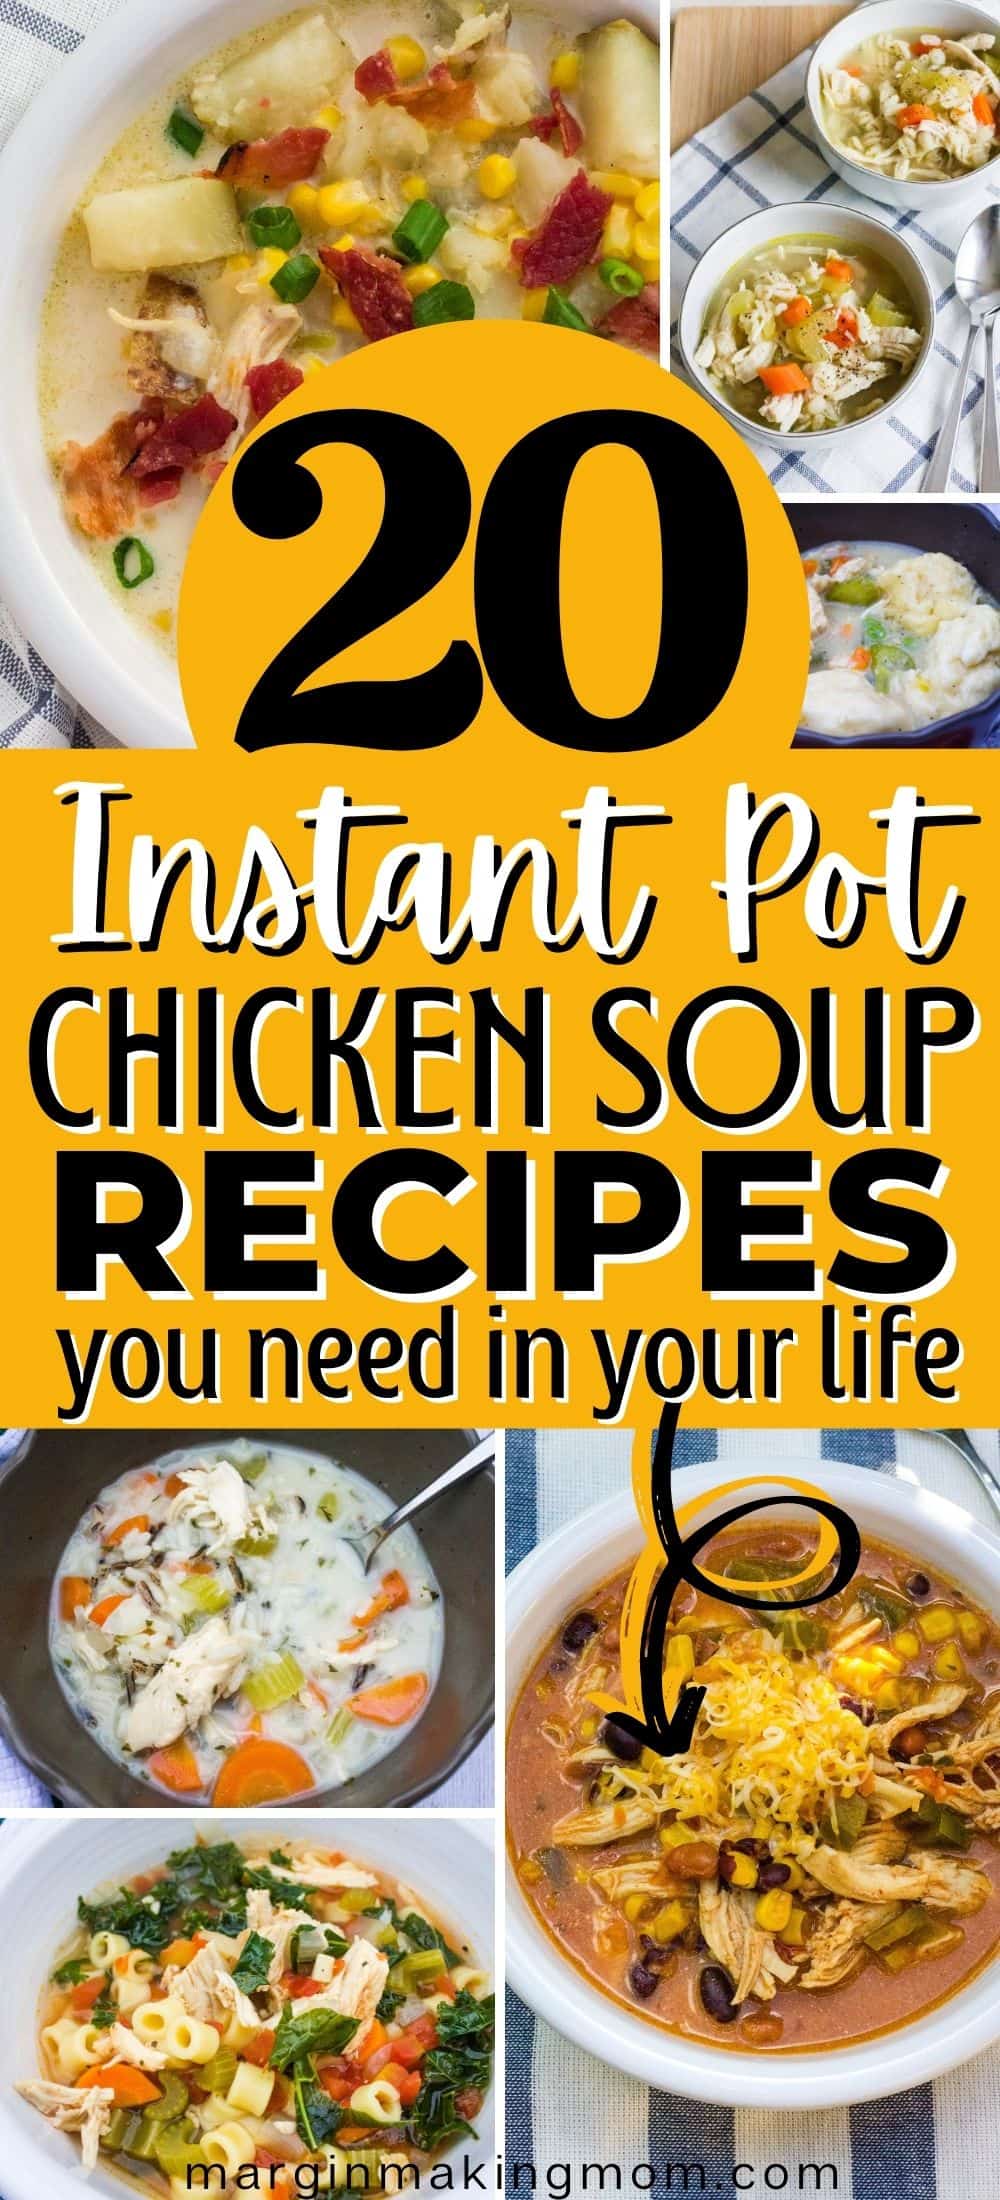 collage image featuring various Instant Pot chicken soup recipes